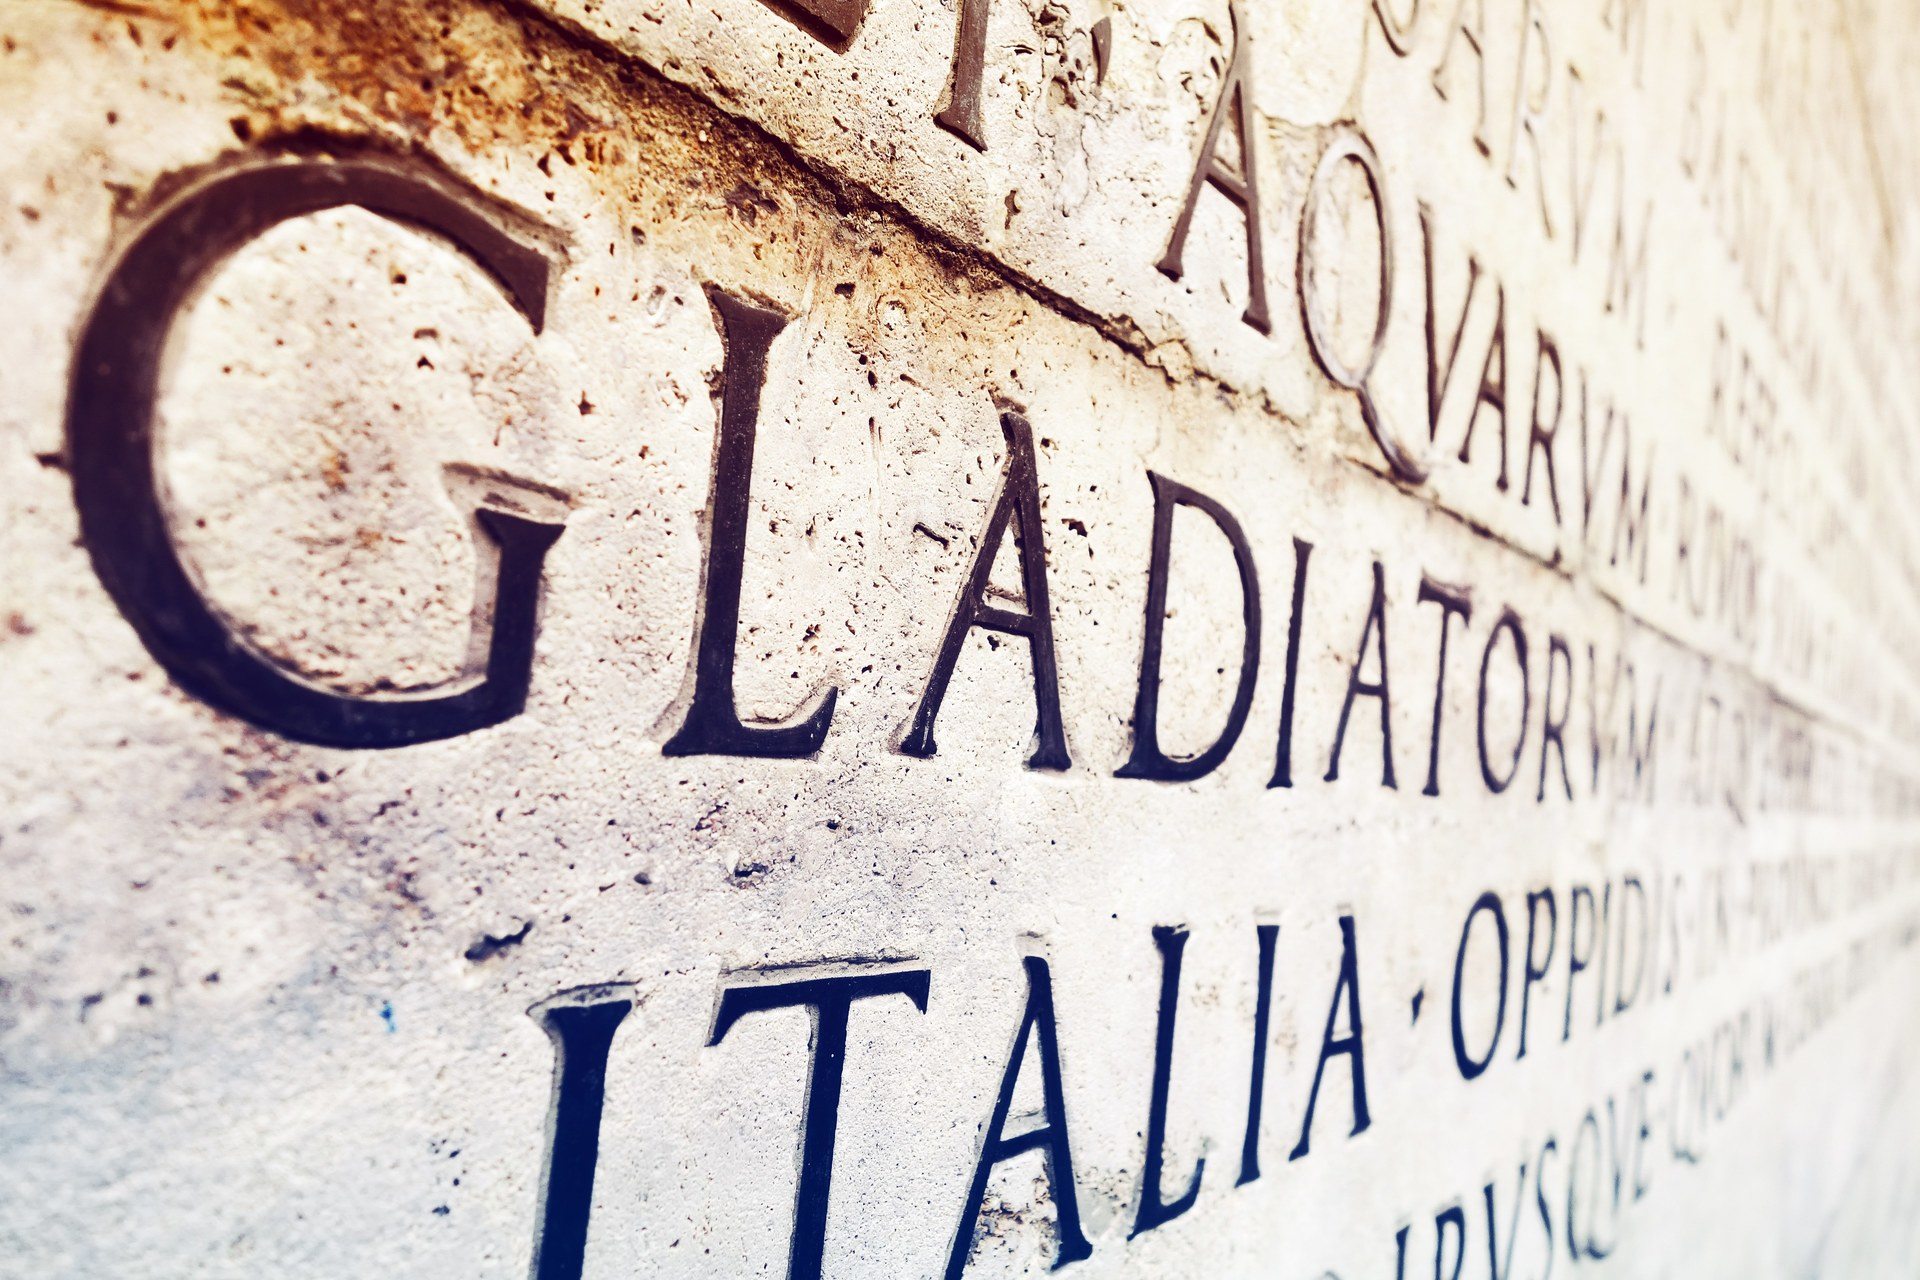 A stone wall engraved with Latin words, the BGSU Latin major or minor opens up doors to the past and present.